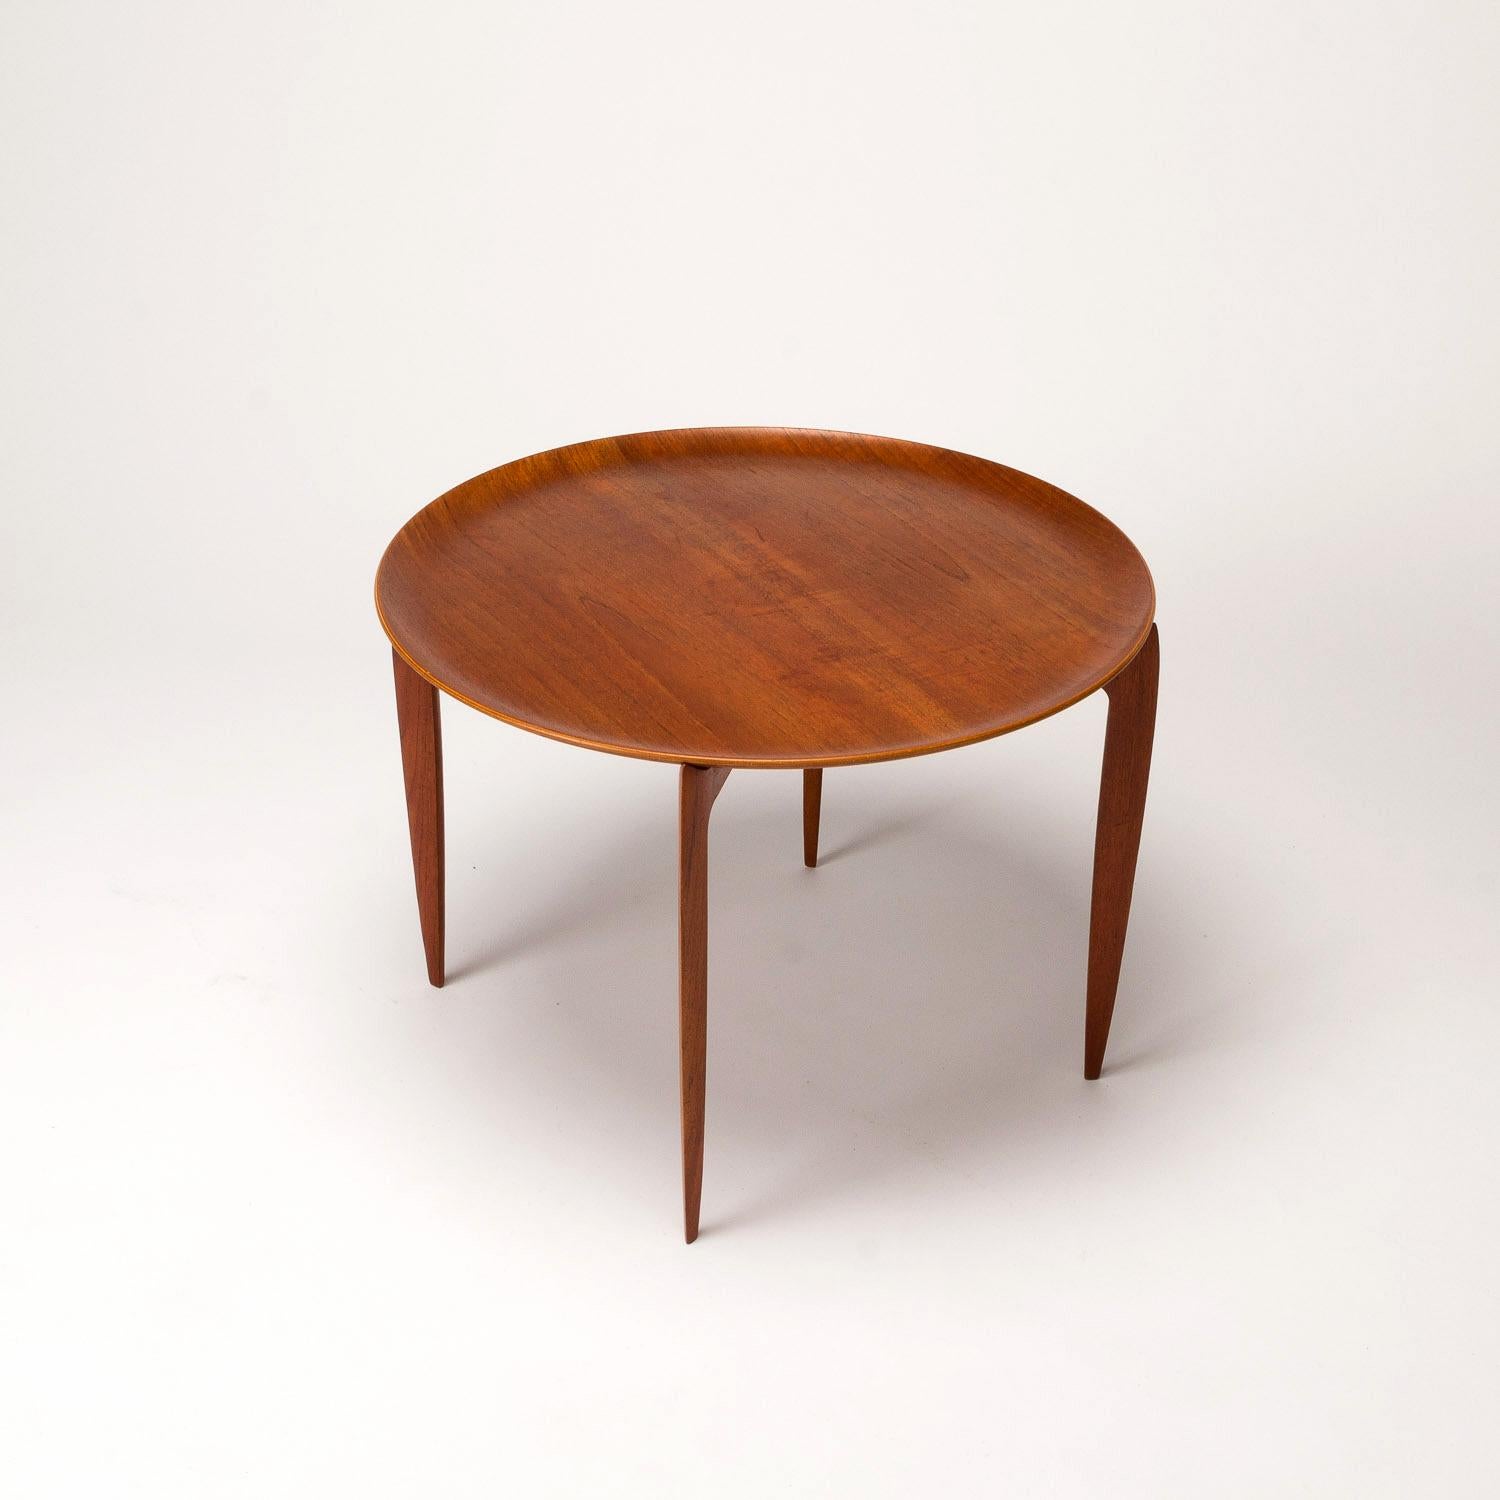 Mid-20th Century Teak Tray Table by H Engholm and Svend Aage Willumsen for Fritz Hansen, Denmark,